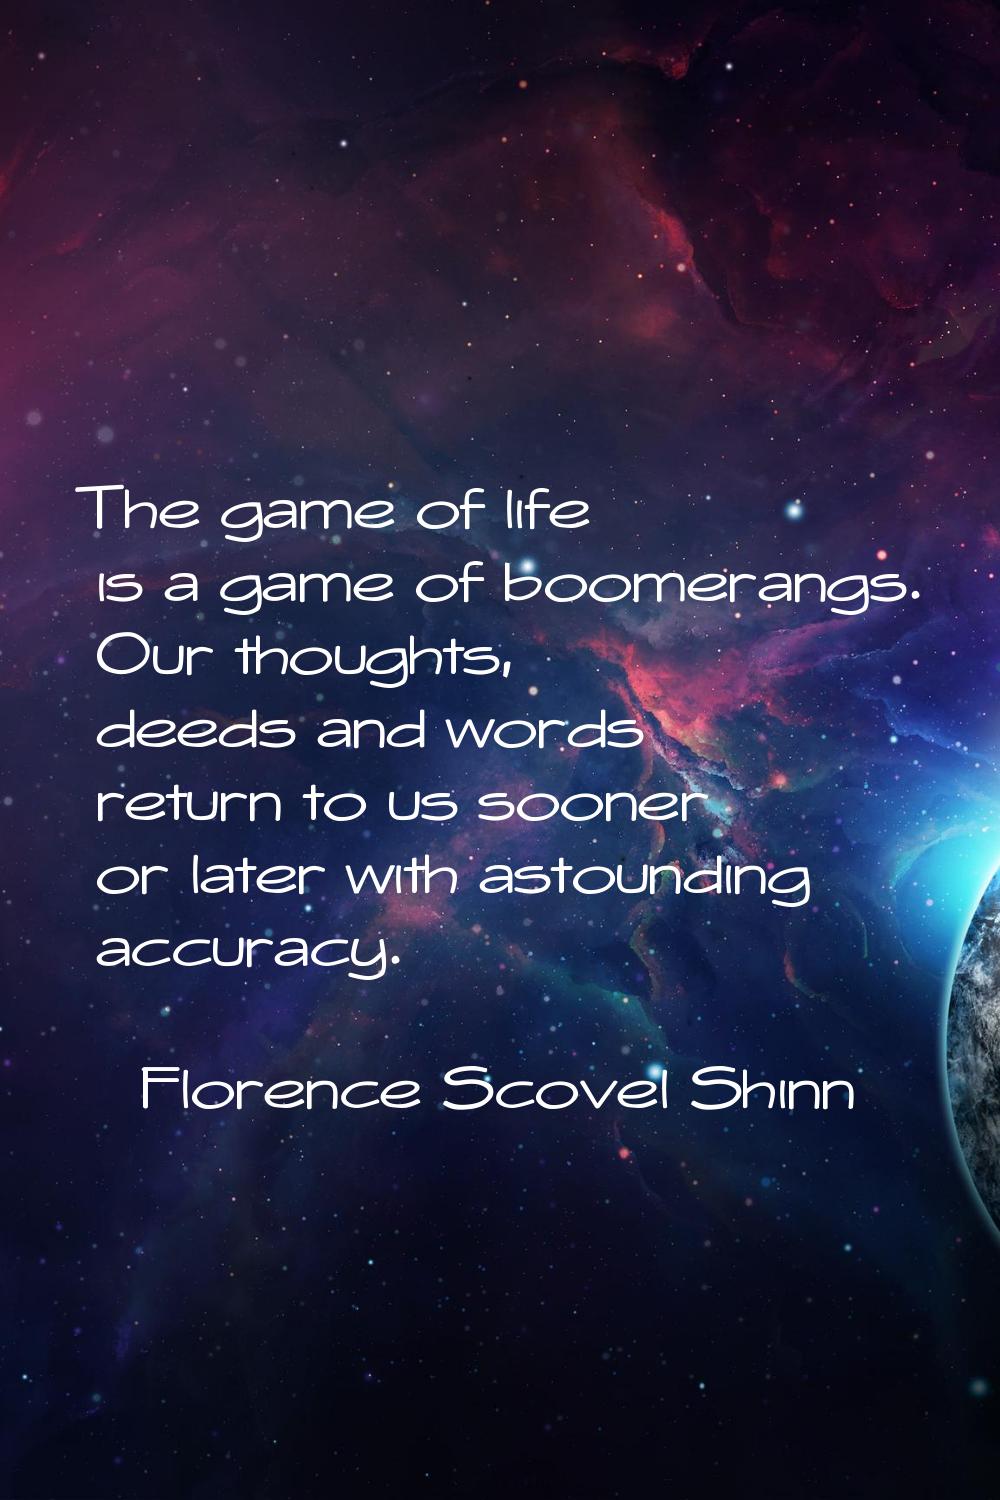 The game of life is a game of boomerangs. Our thoughts, deeds and words return to us sooner or late